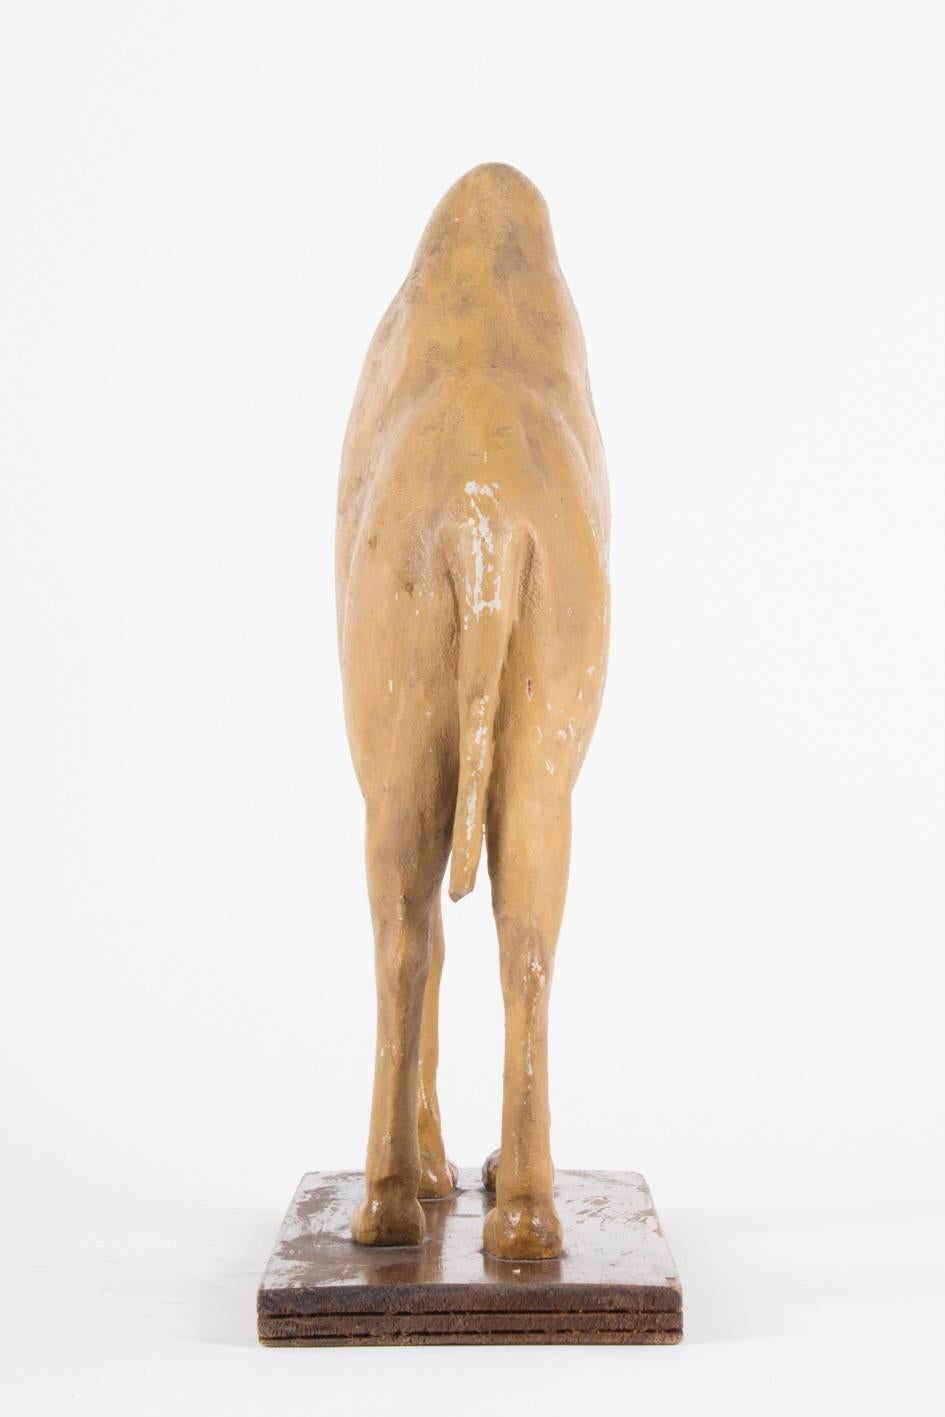 German 19th Century Camel or Dromedary Sculpture For Sale